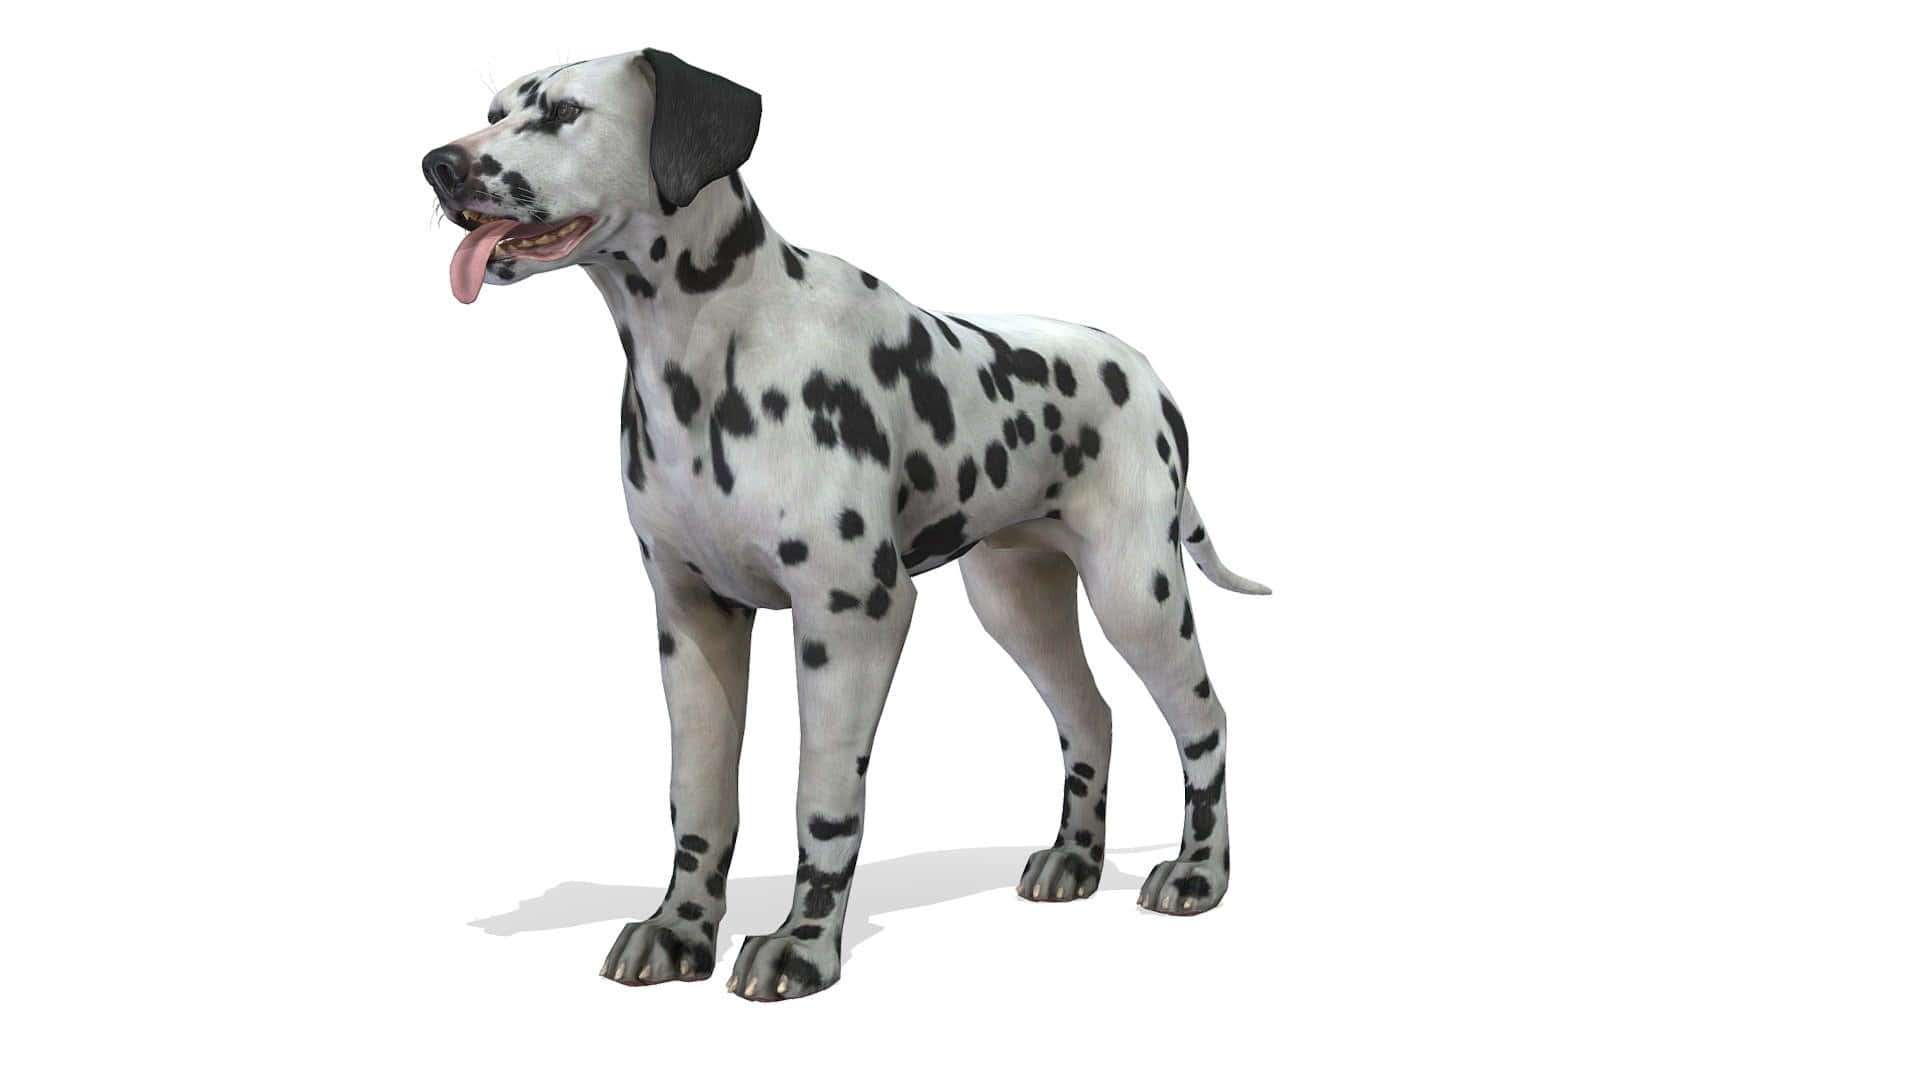 "Black and White Spotted Dog"